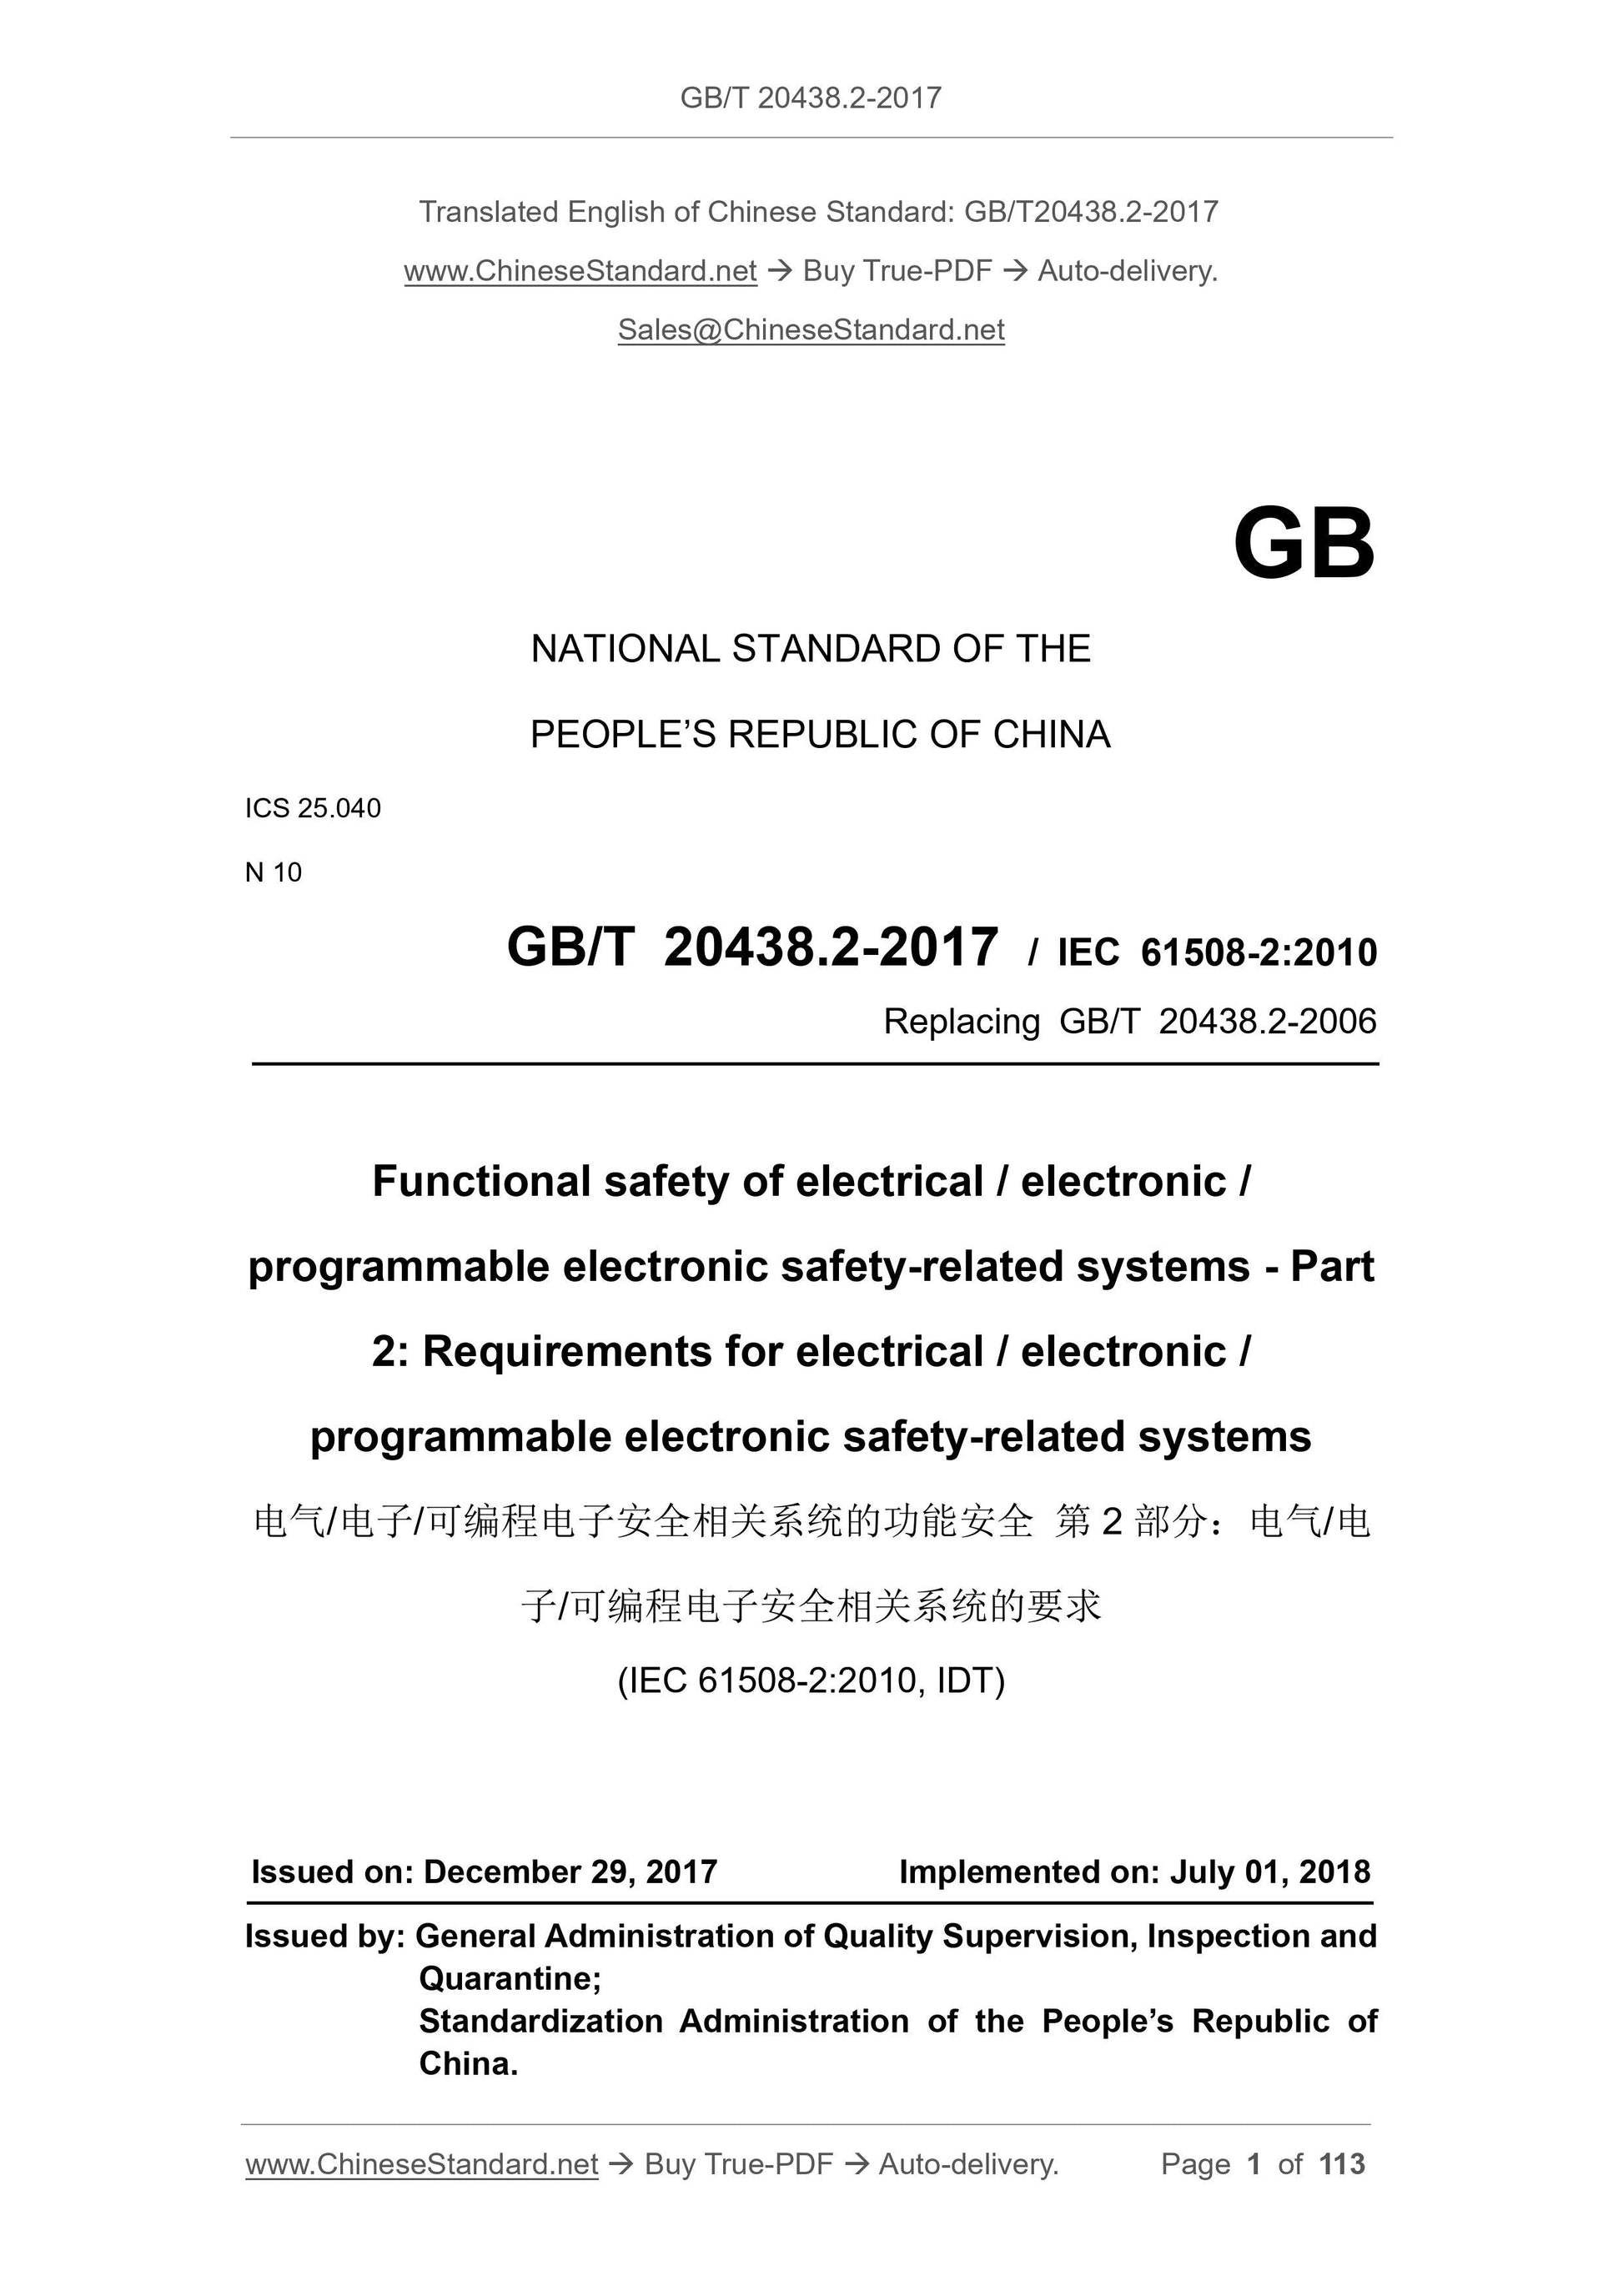 GB/T 20438.2-2017 Page 1